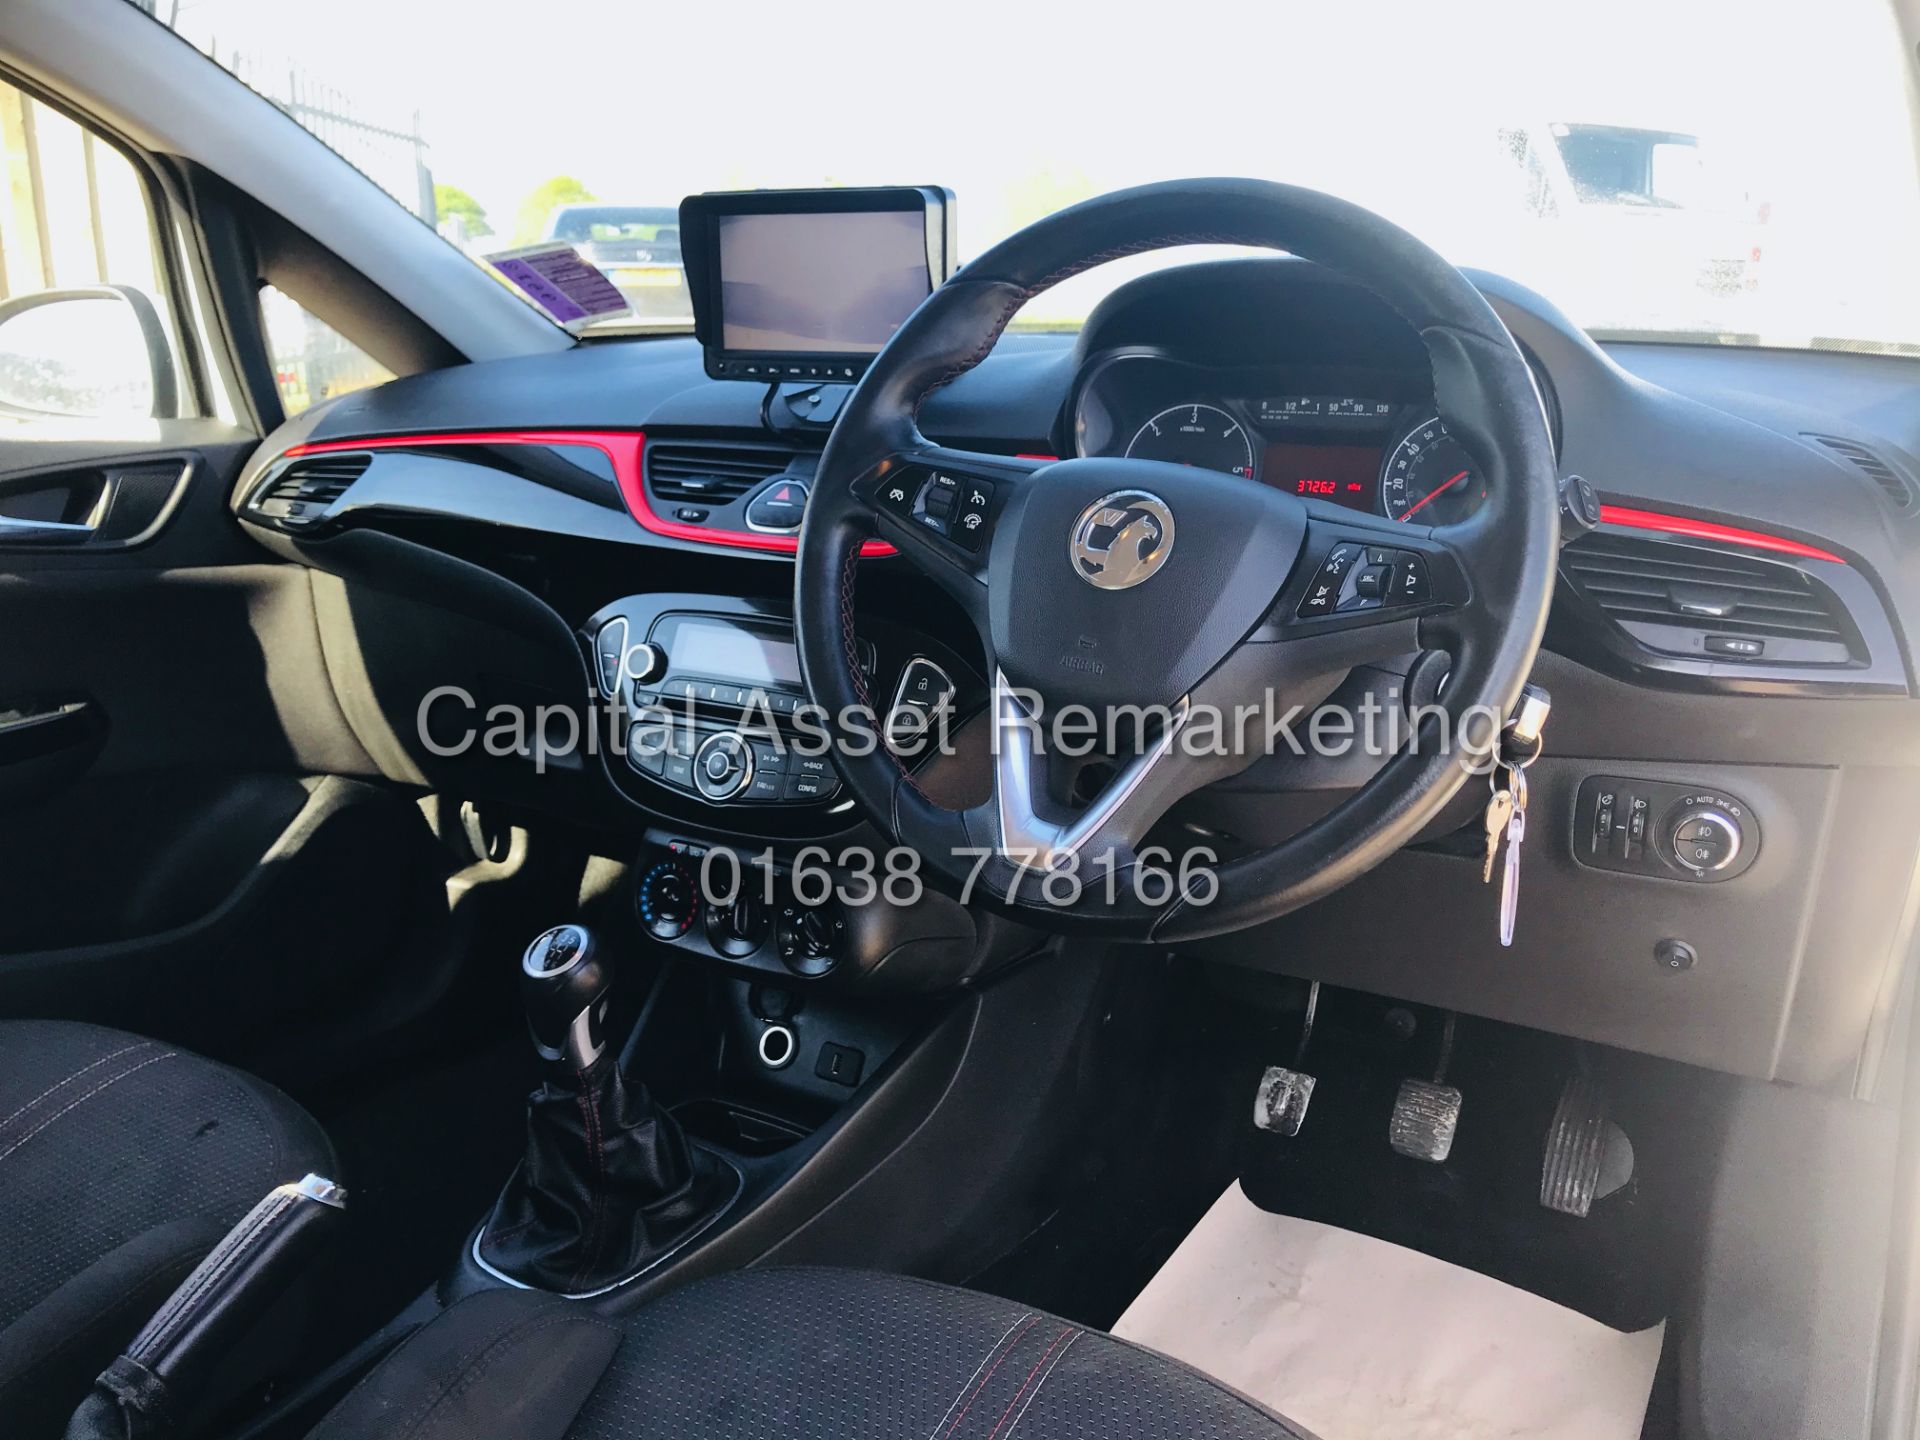 VAUXHALL CORSA 1.3CDTI "SPORTIVE" VAN (2017 MODEL) 1 OWNER FSH - LOW MILES - AIR CON -ALLOYS -EURO 6 - Image 18 of 33